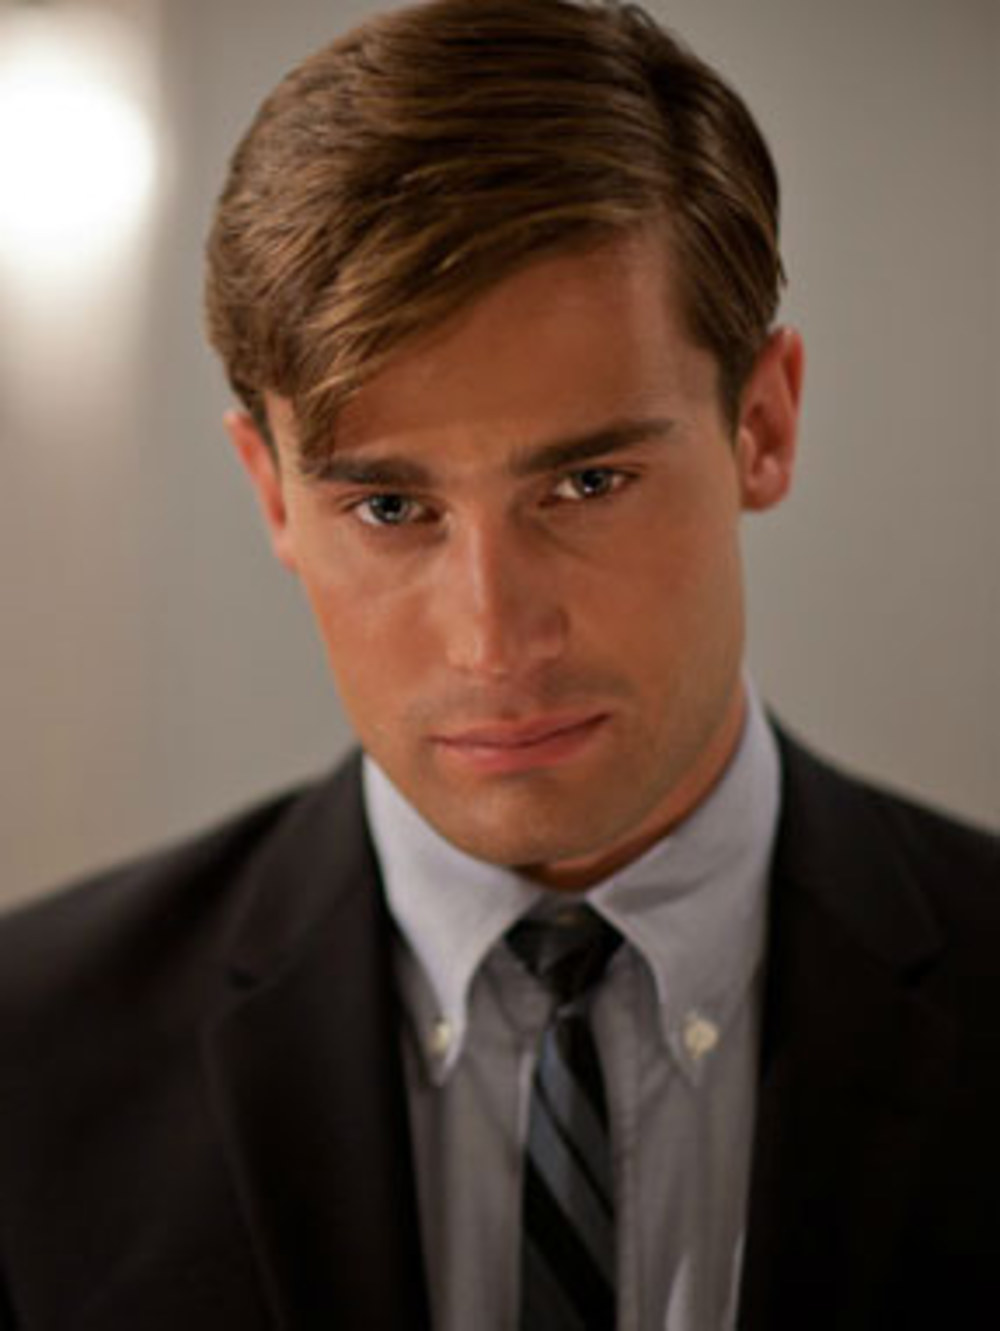 Christian Cooke Quotes. QuotesGram